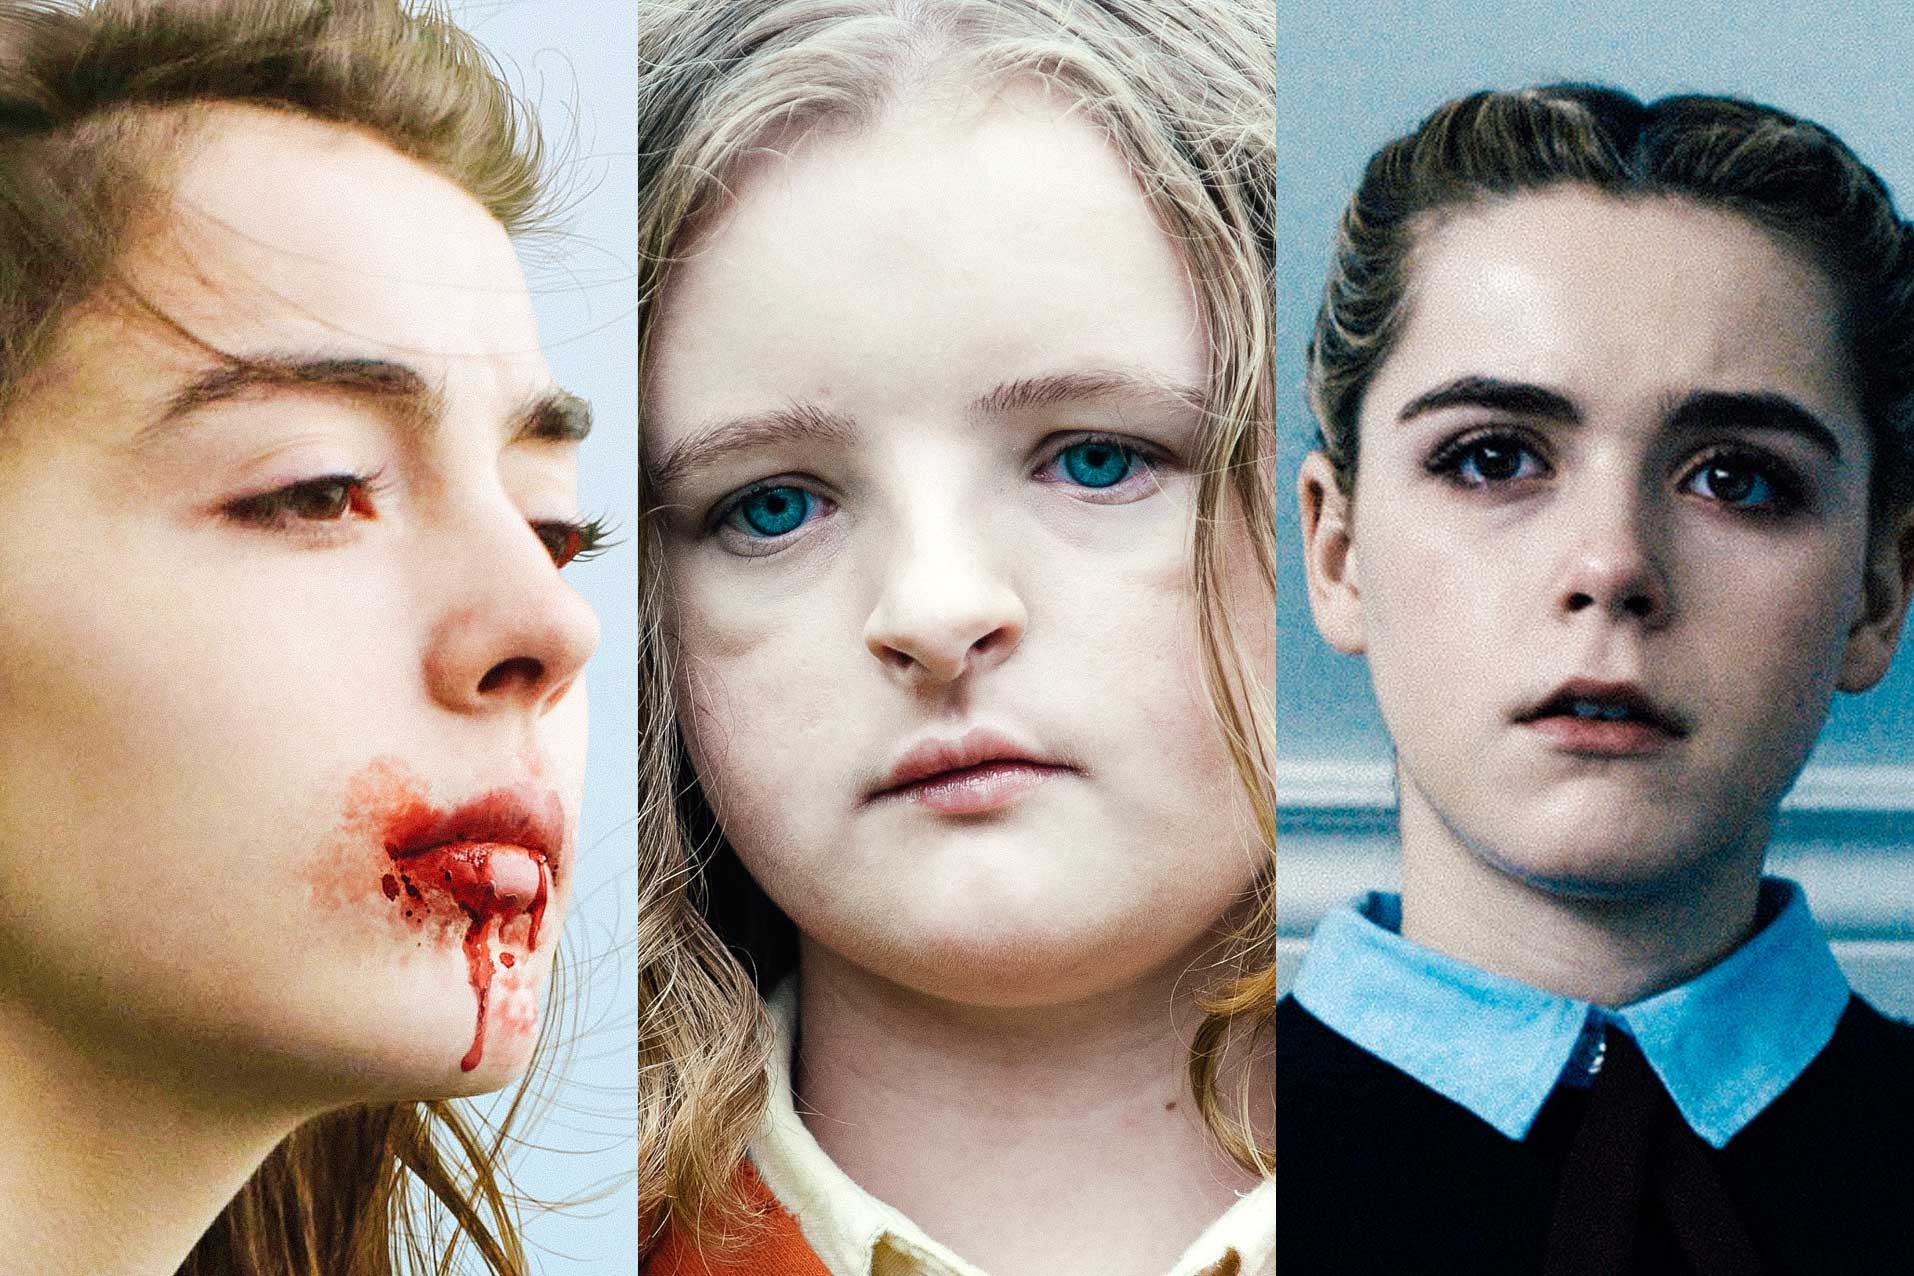 Hereditary, Raw, and The Blackcoat’s Daughter.